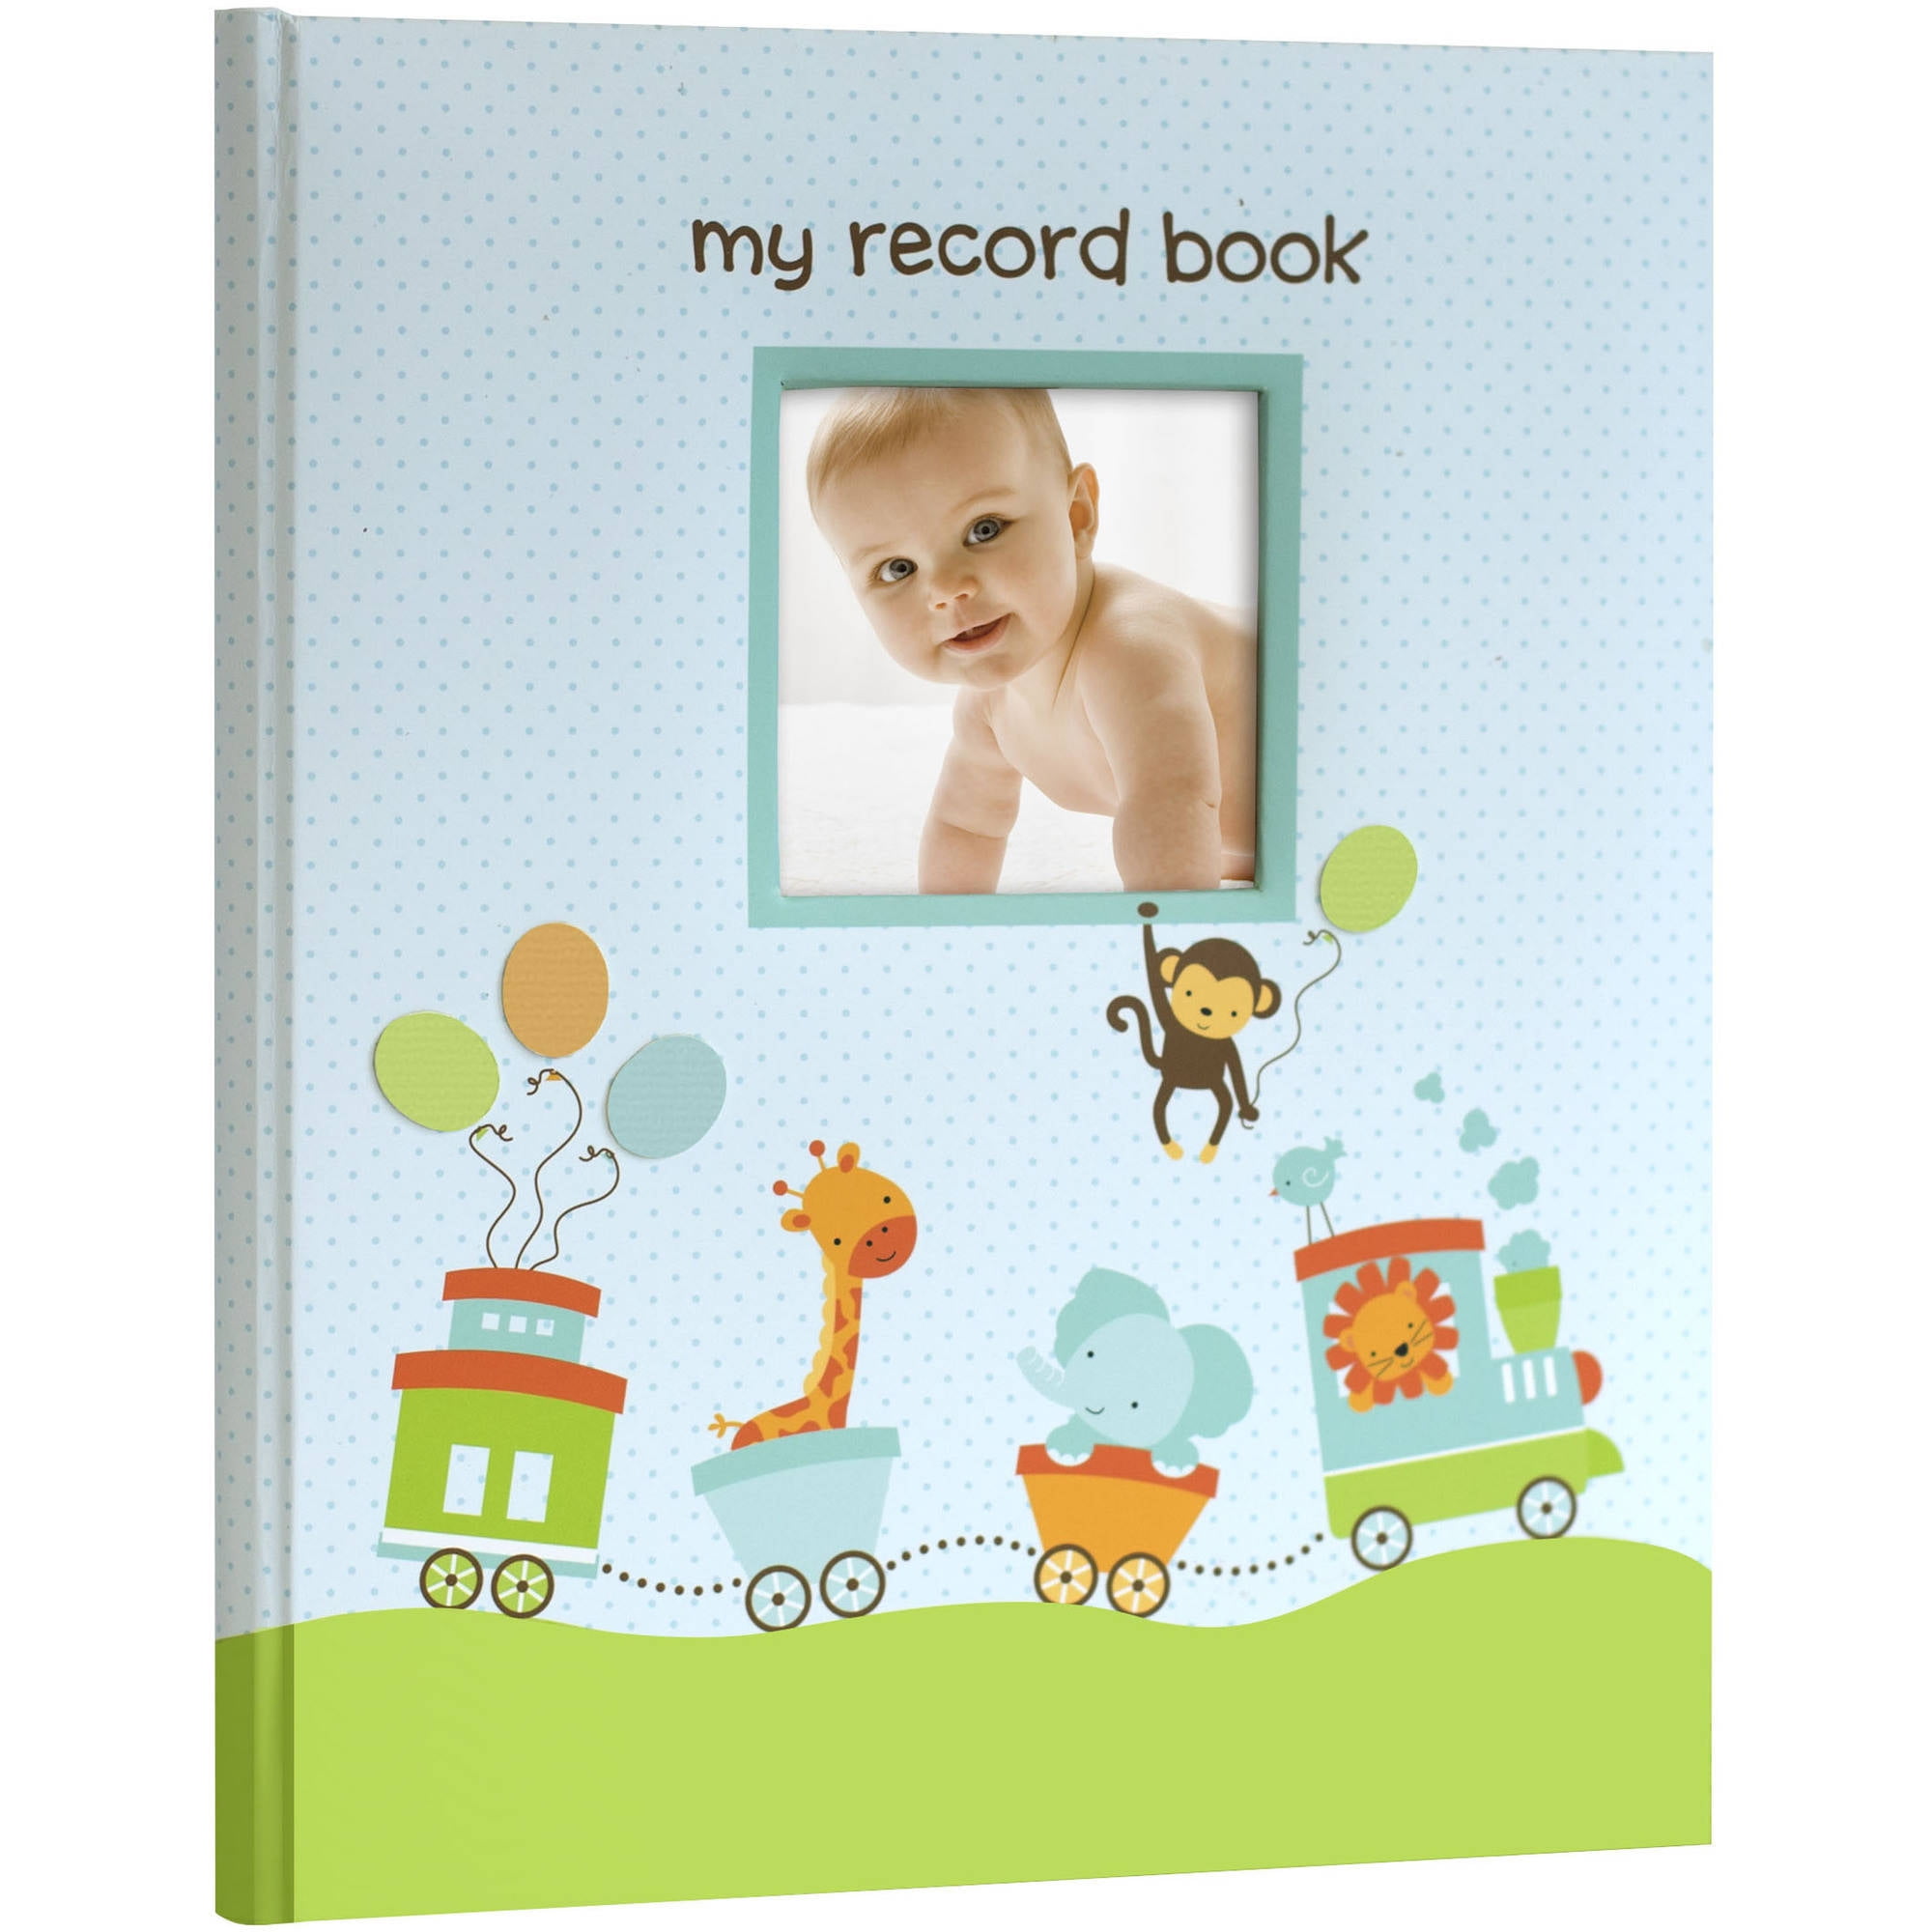 Grey/White NEW L'il Peach STAR BEARS Baby Memory Record Book First Five Years 